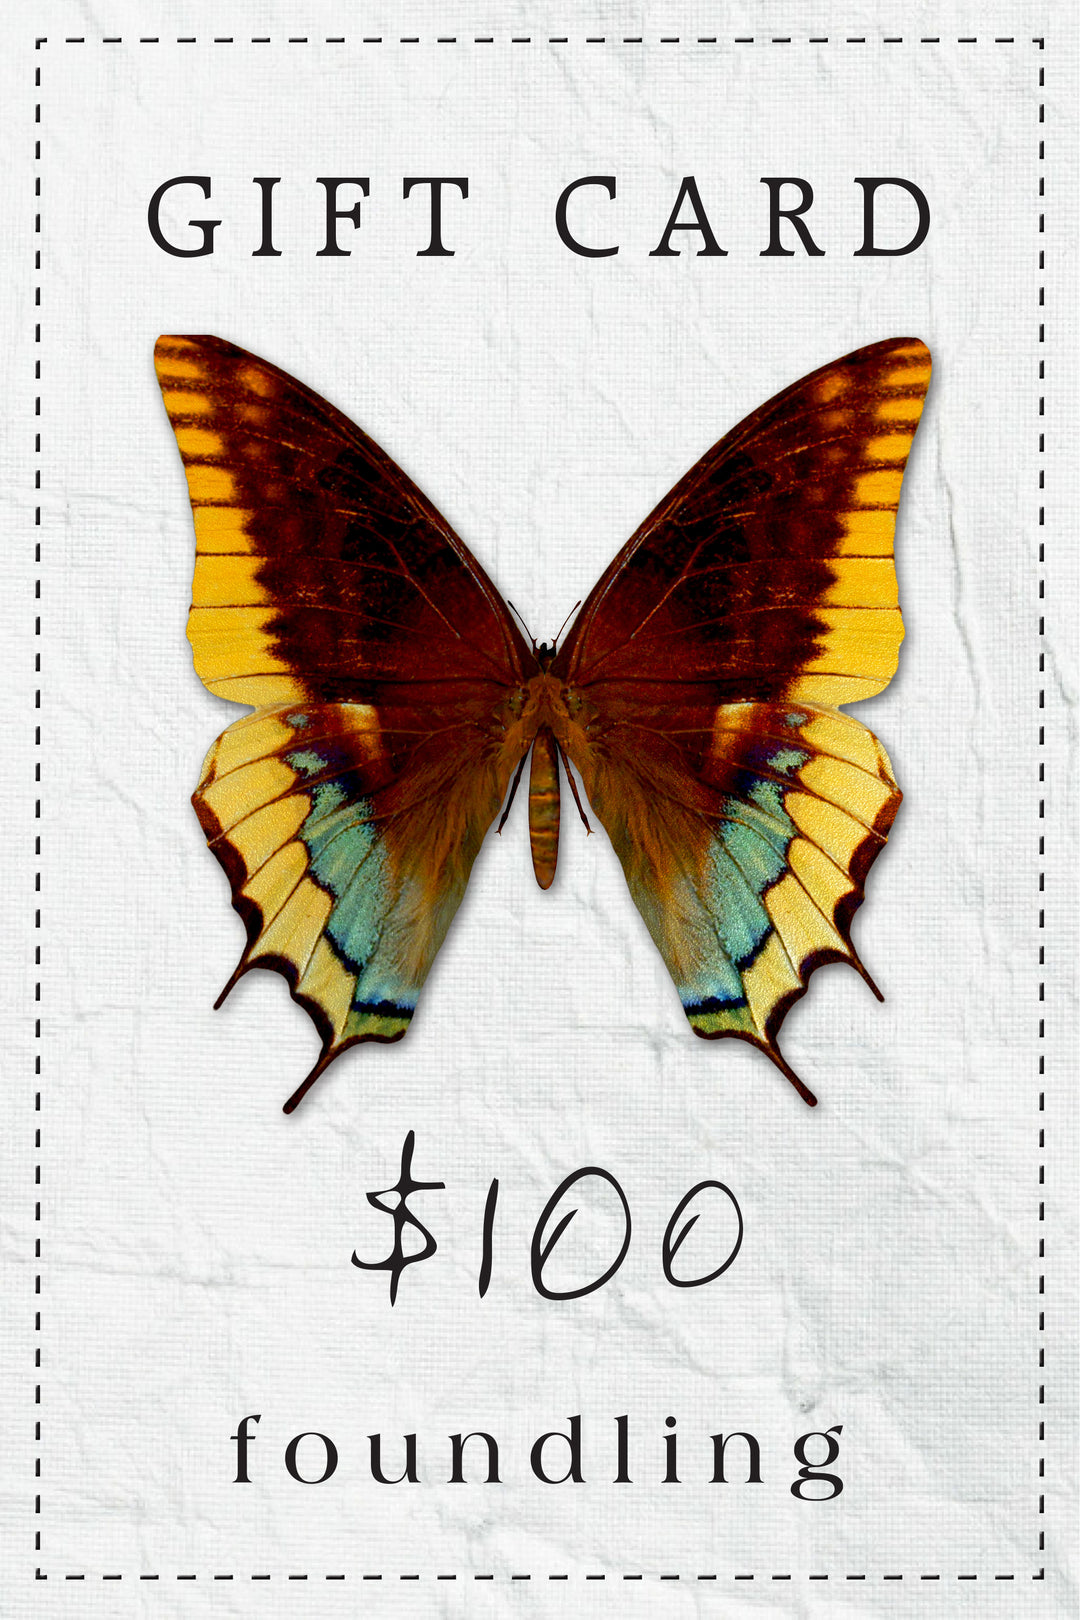 foundling gift card $100